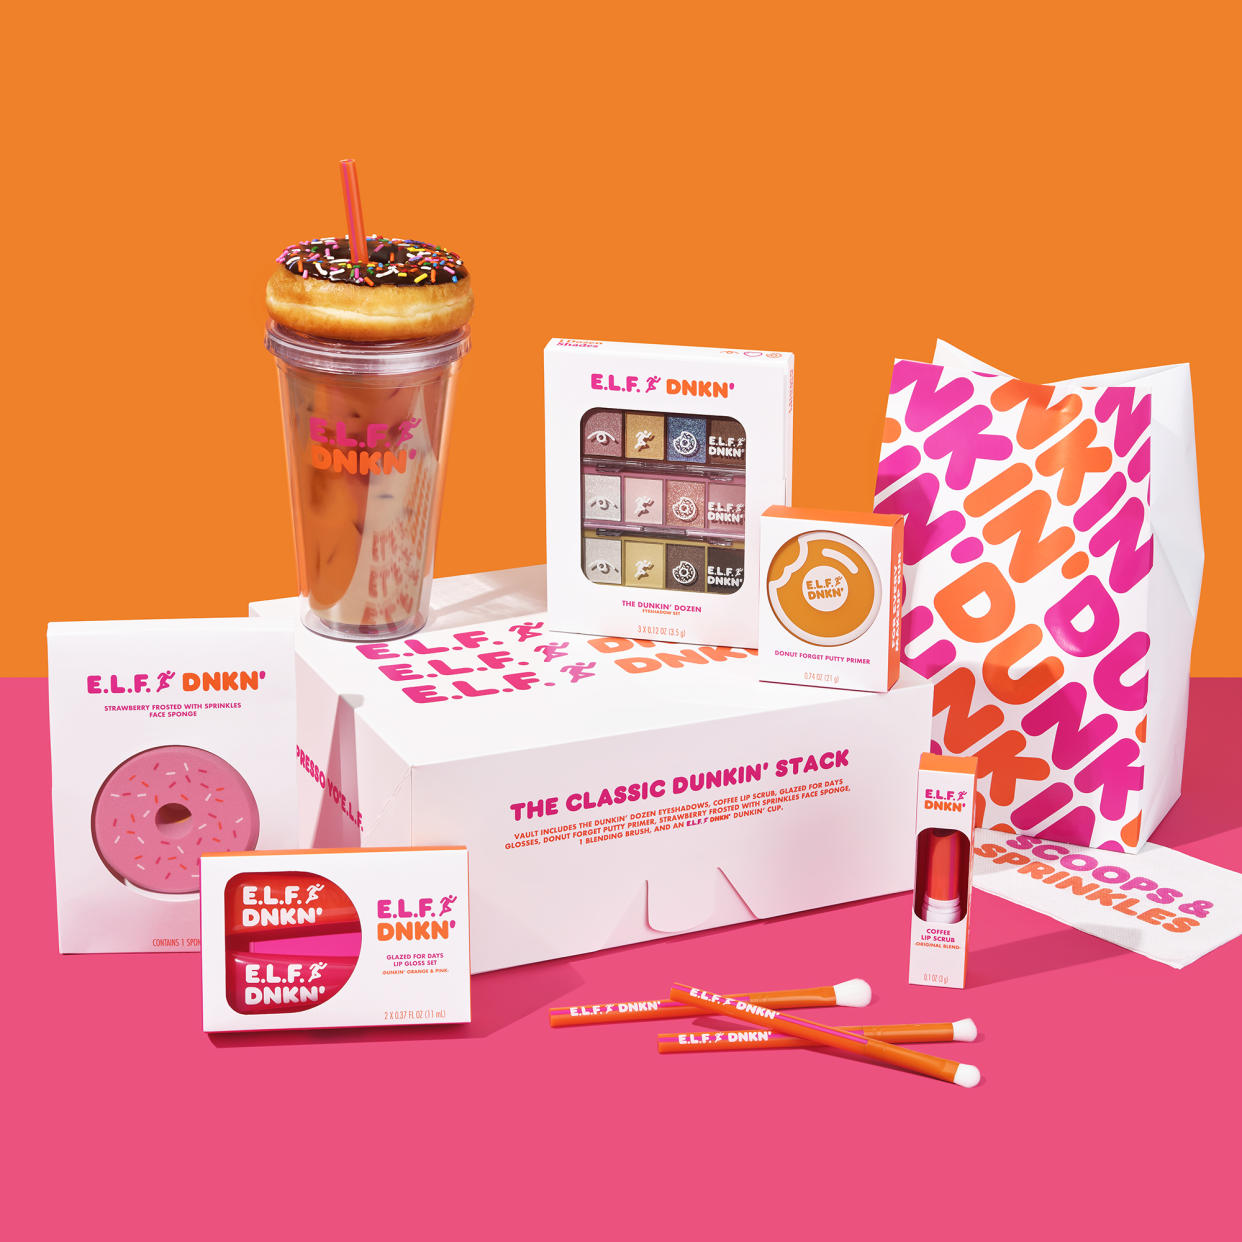 e.l.f. x Dunkin’ makeup & beauty collection (Courtesy: Davide Luciano)